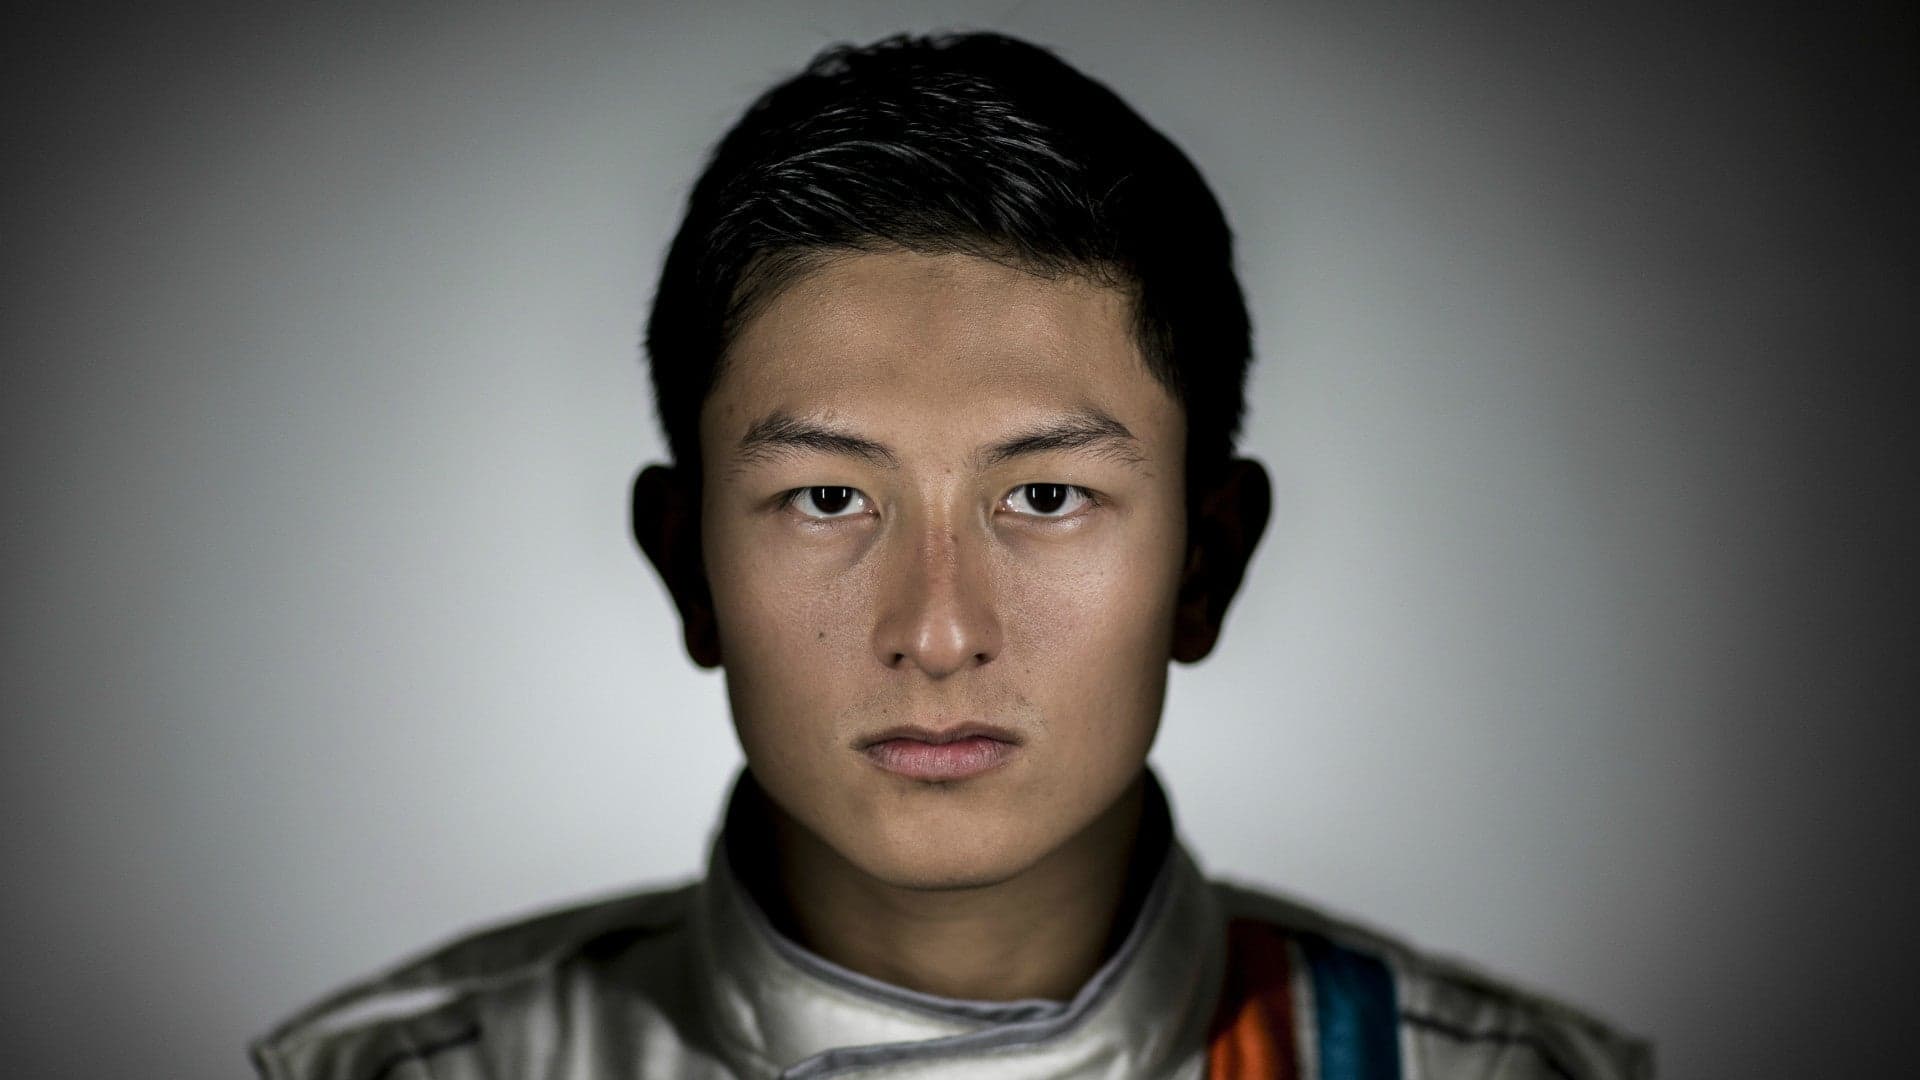 Can a Government-Backed Crowdfunding Campaign Save This F1 Driver’s Career?